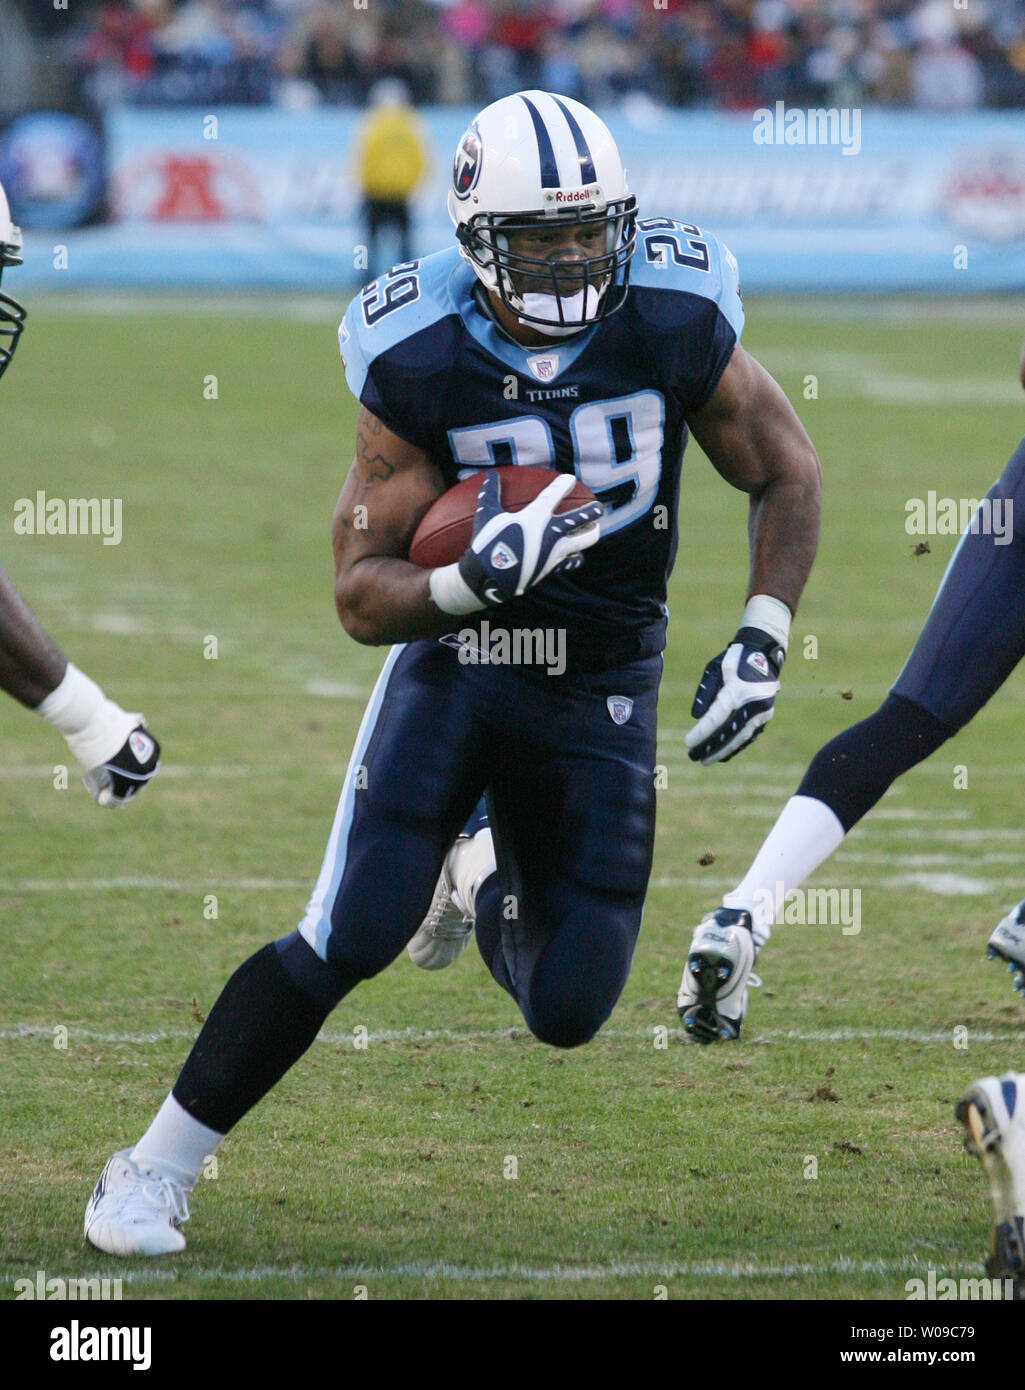 Tennessee Titans running back Chris Brown (29) runs for a